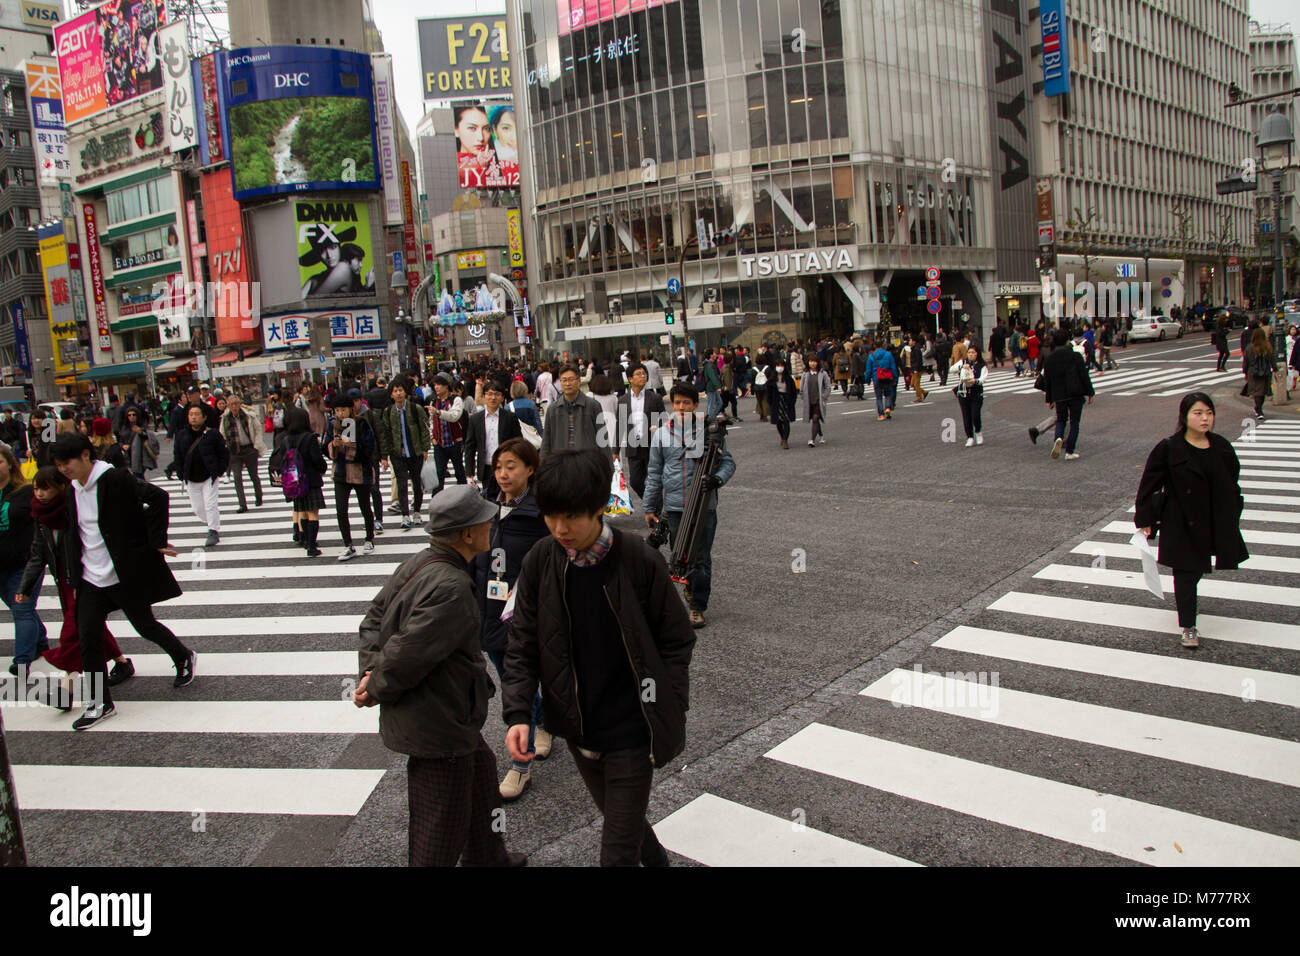 Shibuya crossing, the worlds busiest intersection, Tokyo, Japan, Asia Stock Photo